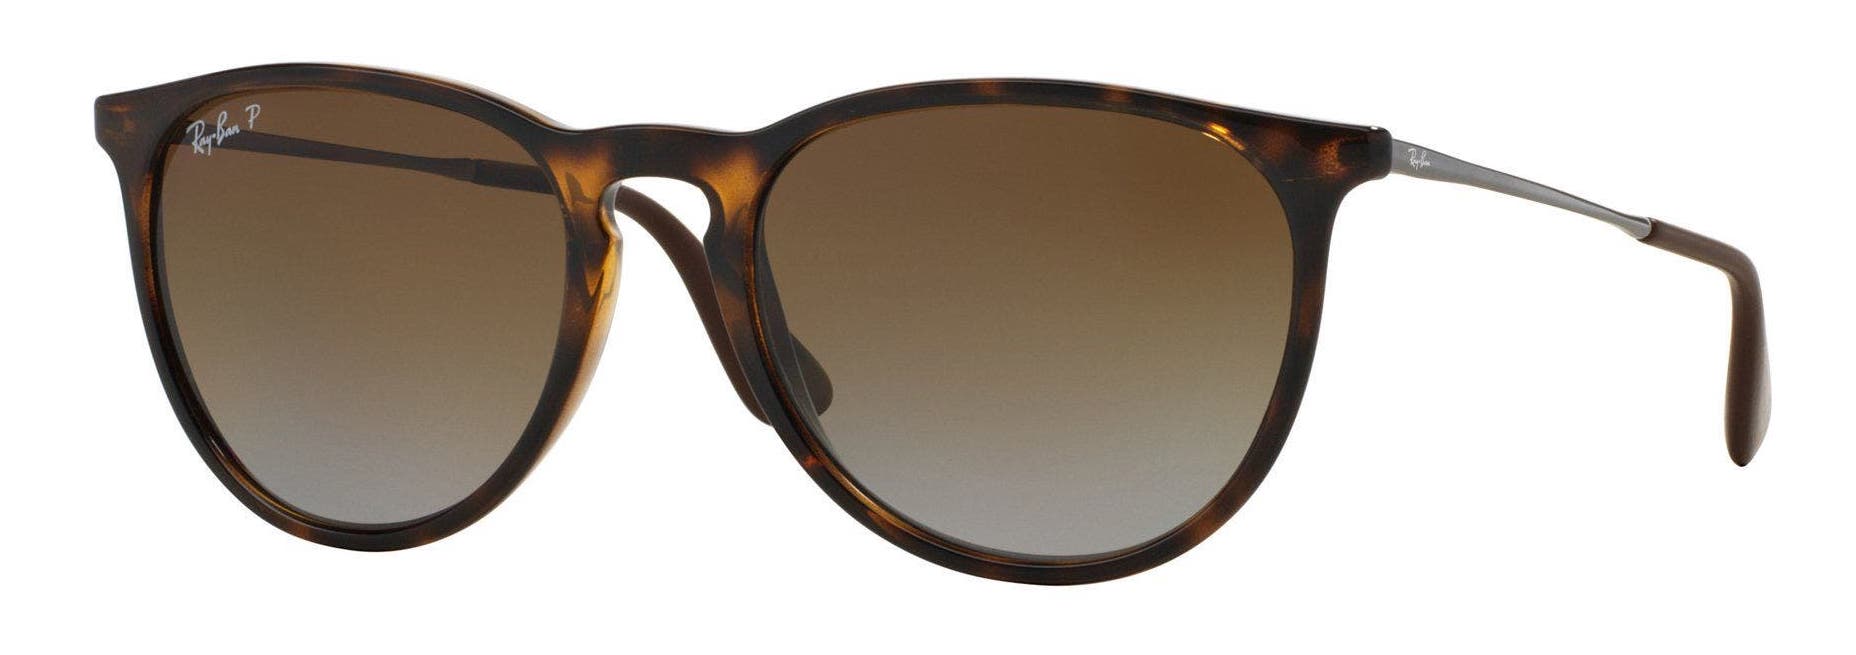 the best women's polarized sunglasses, the Ray-Ban Erika. Havana brown frame with round polarized brown lenses.